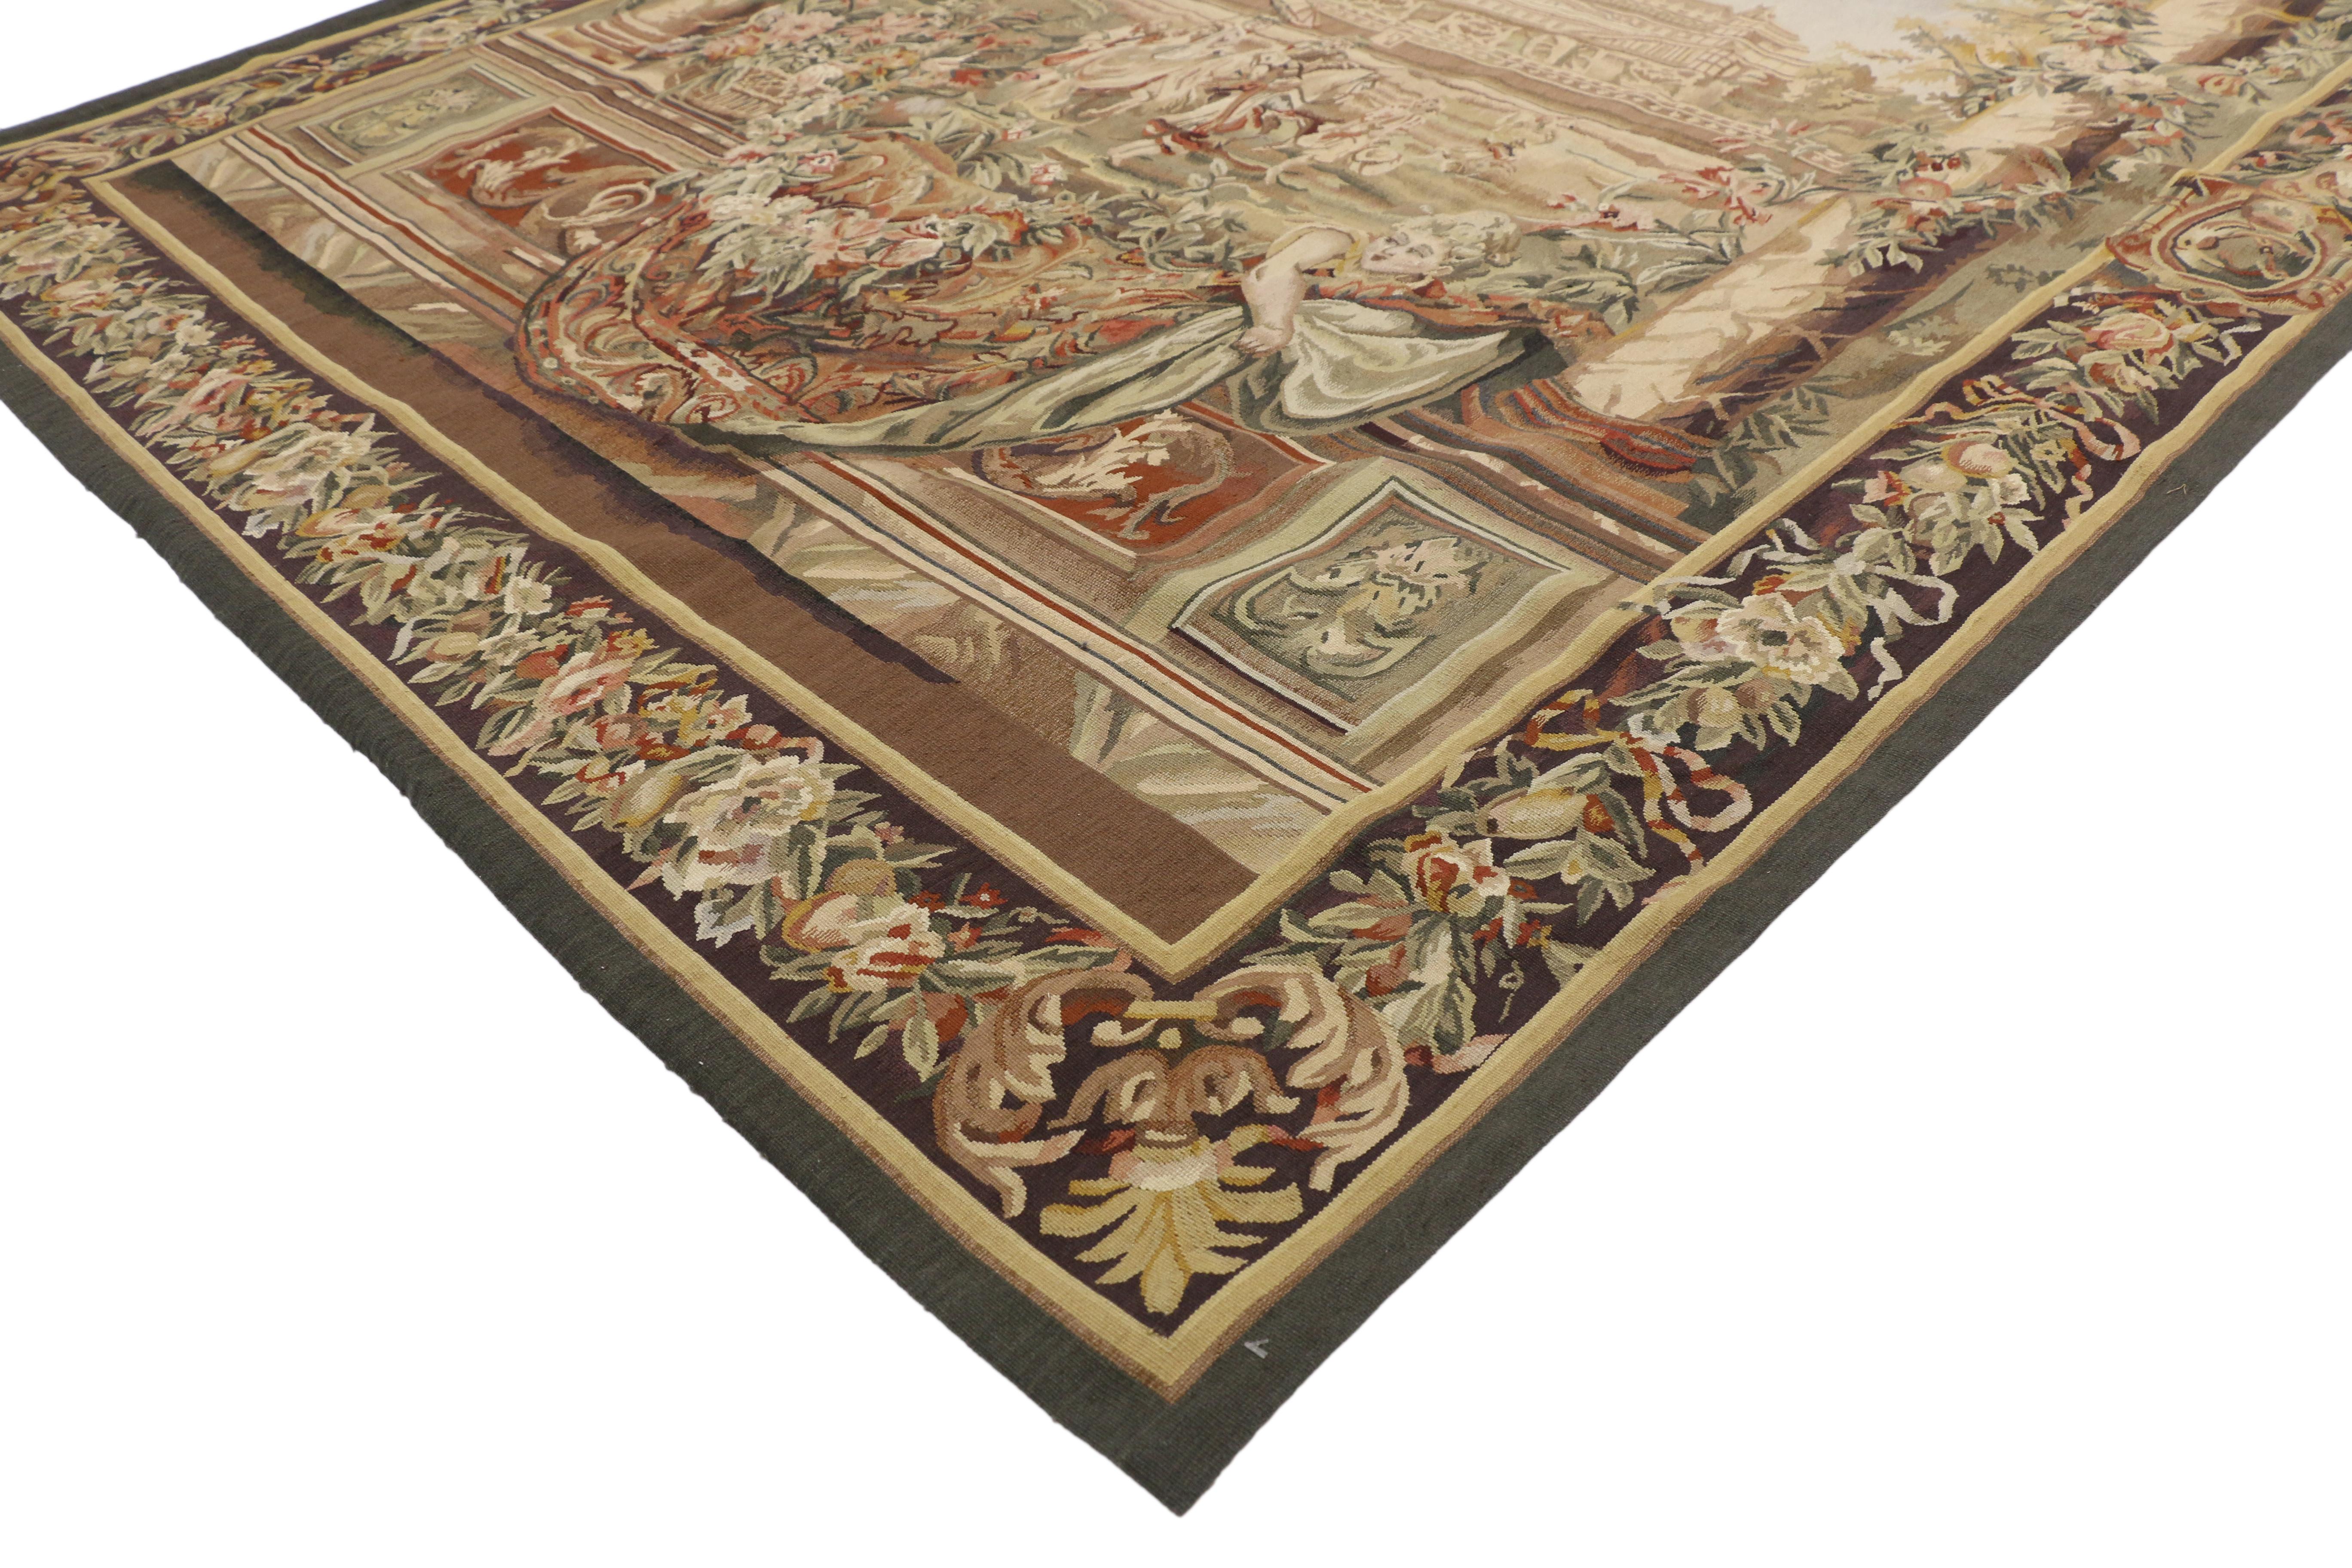 73692 Charles le Brun Gobelins Inspired Château Neuf Saint-Germain Tapestry with Louis XIV Style, Wall Hanging 06'00 x 07'03. This hand-woven wool Louis XIV style tapestry features Château Neuf Saint-Germain, from the series of tapestries 'The